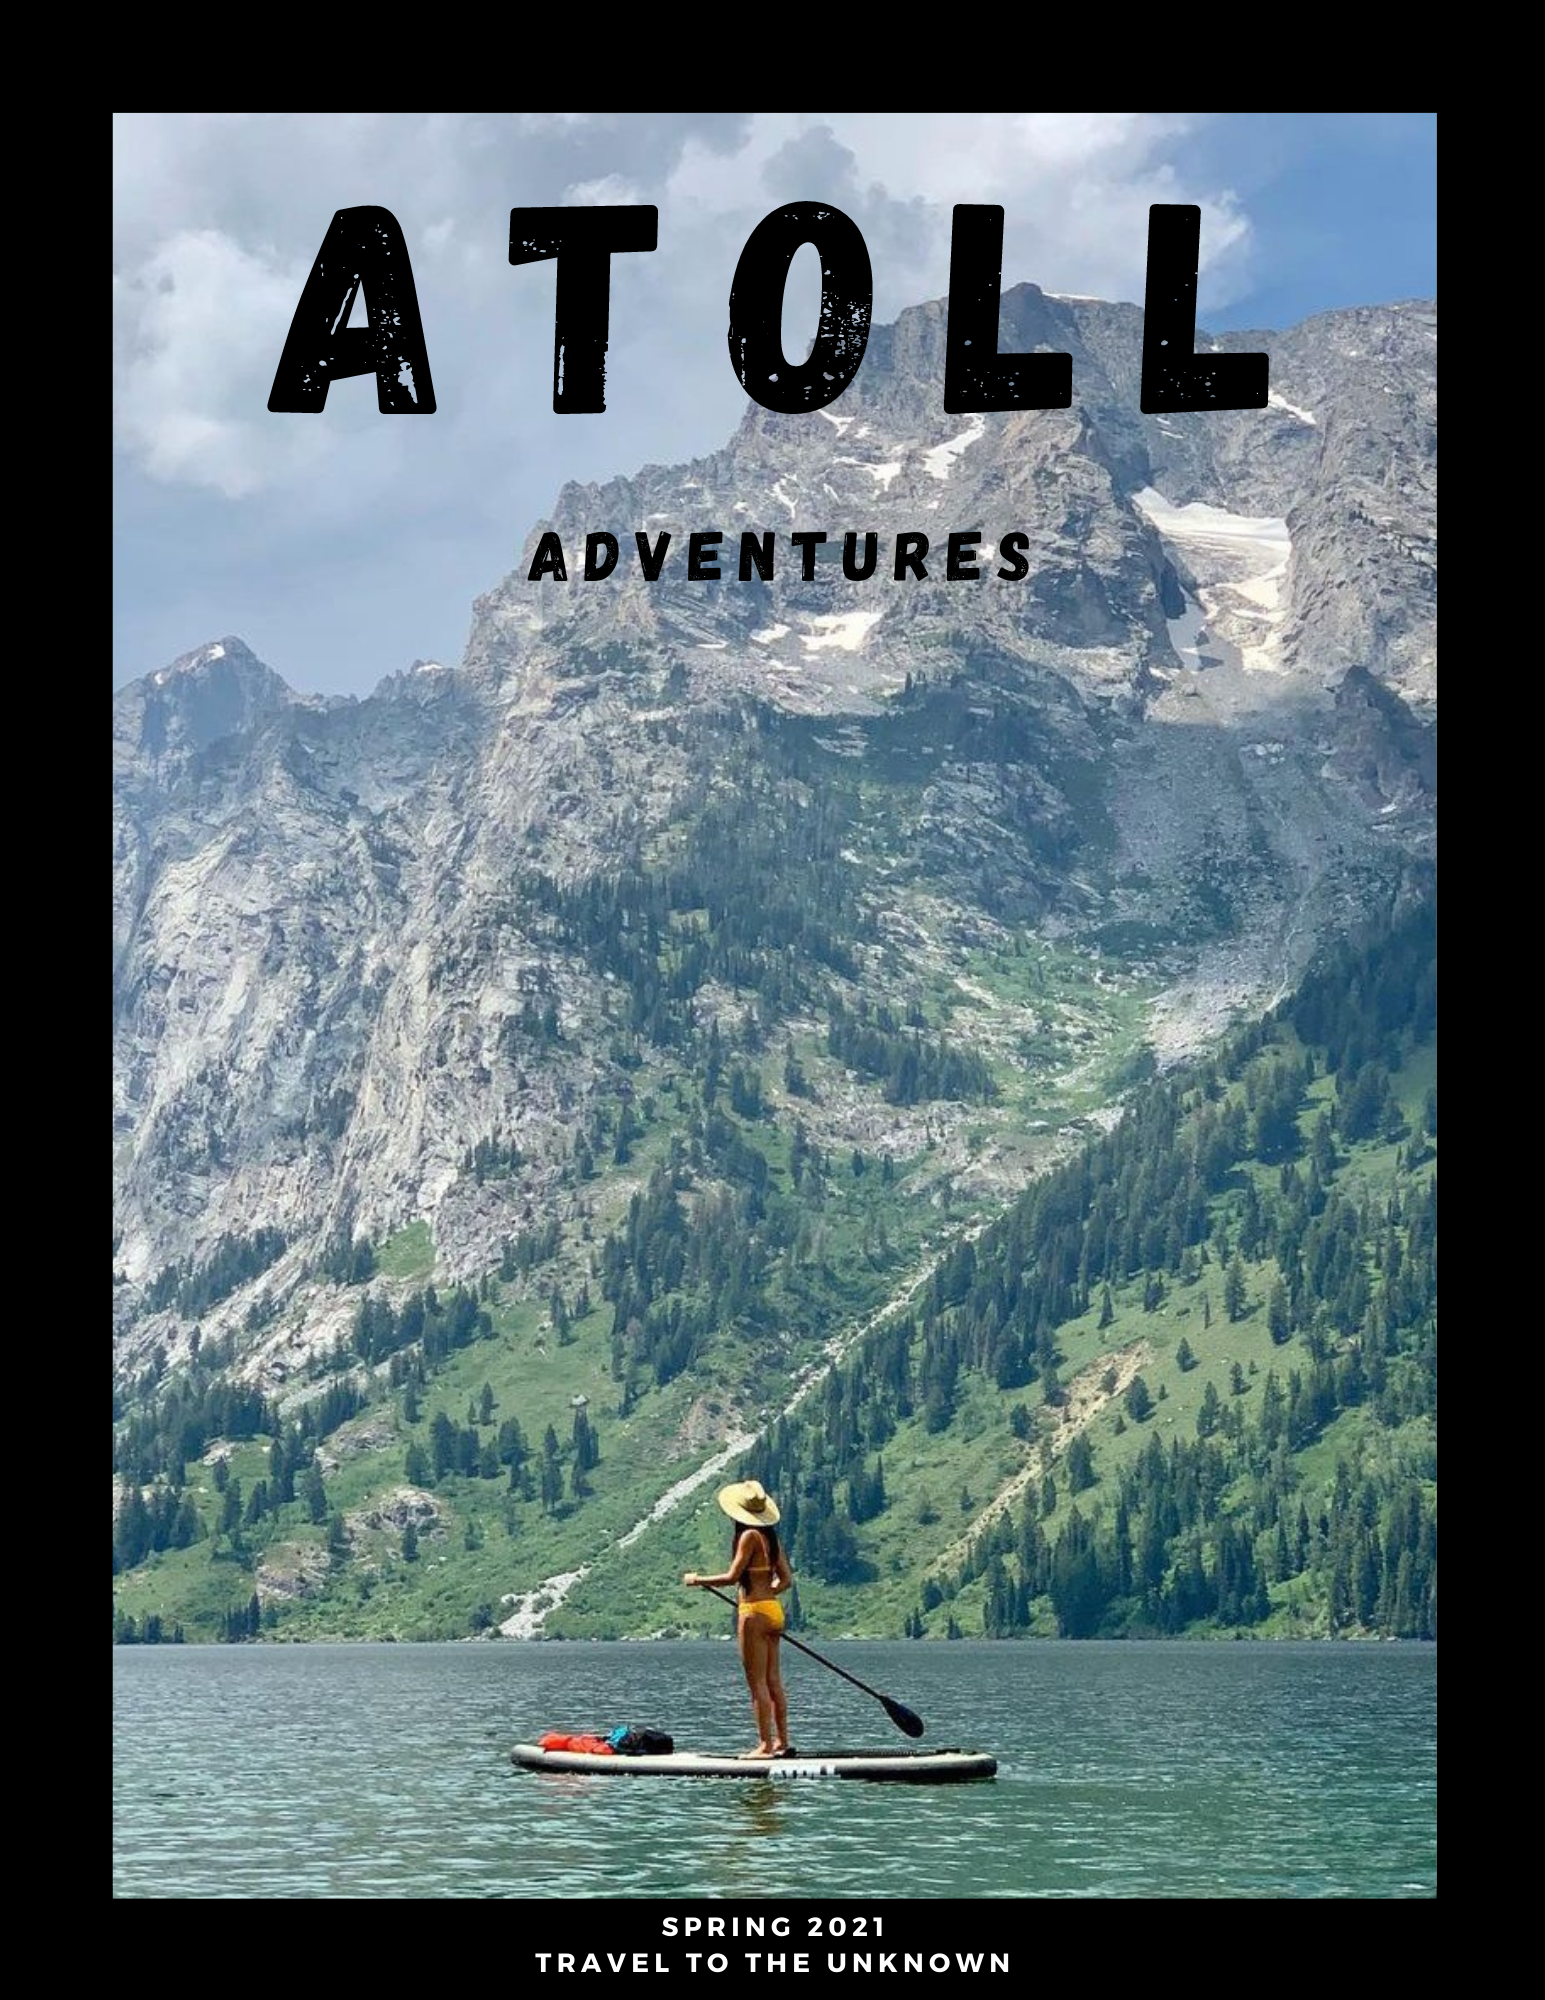 Atoll Adventures poster with A lady standing on an inflatable paddle board.